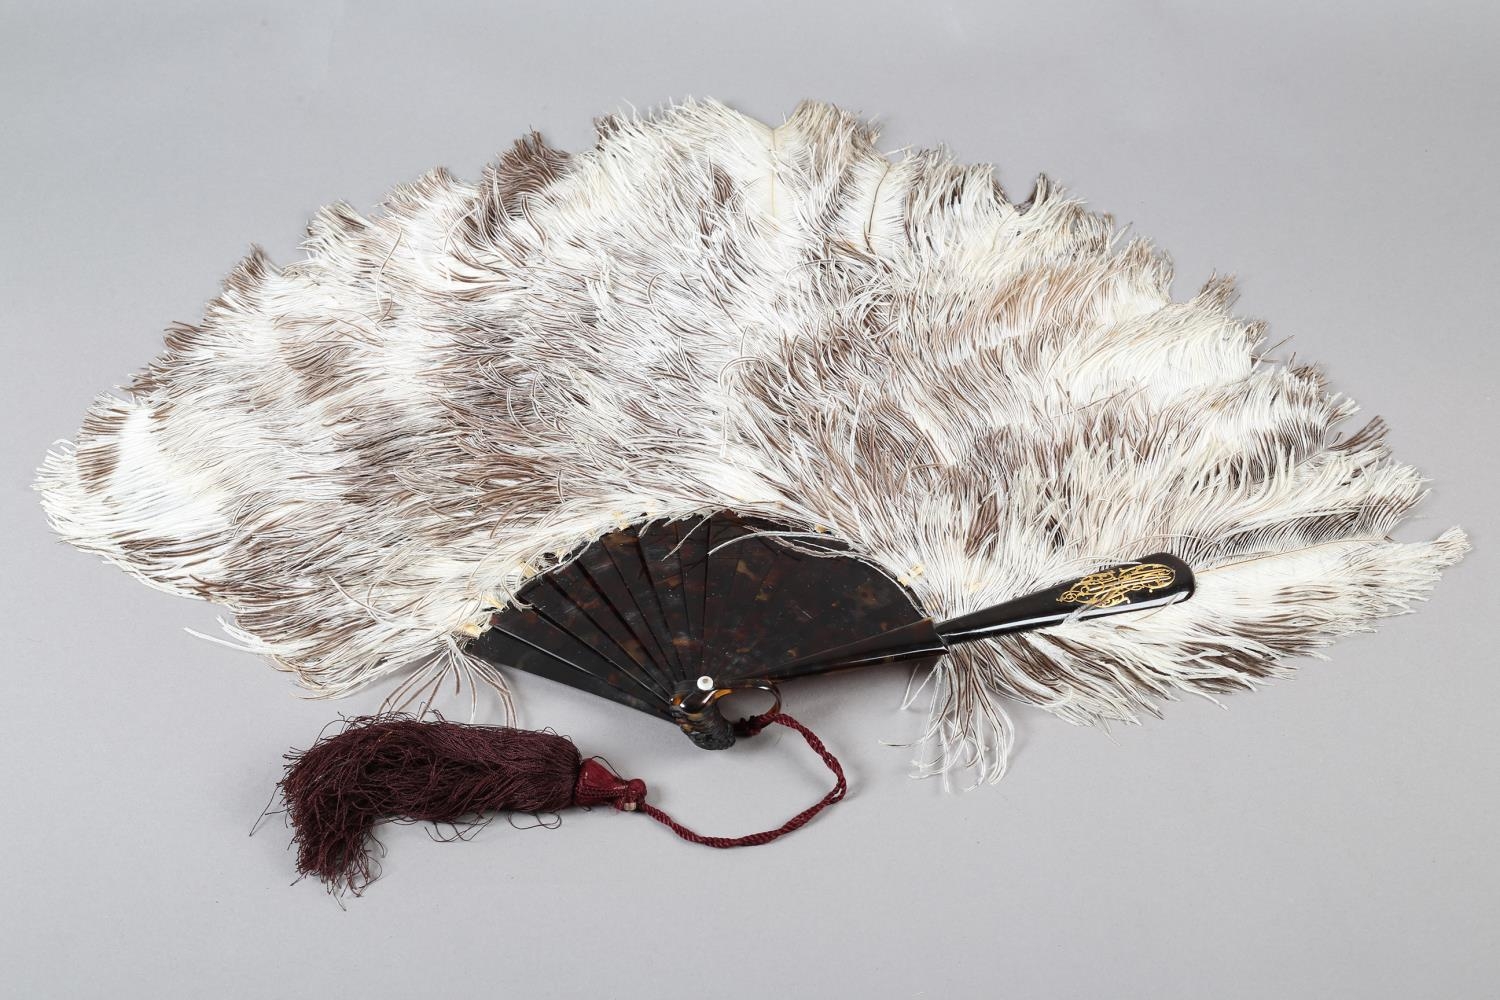 A Duvelleroy female ostrich feather fan, mounted on tortoiseshell, marked “Duvelleroy” in gold on